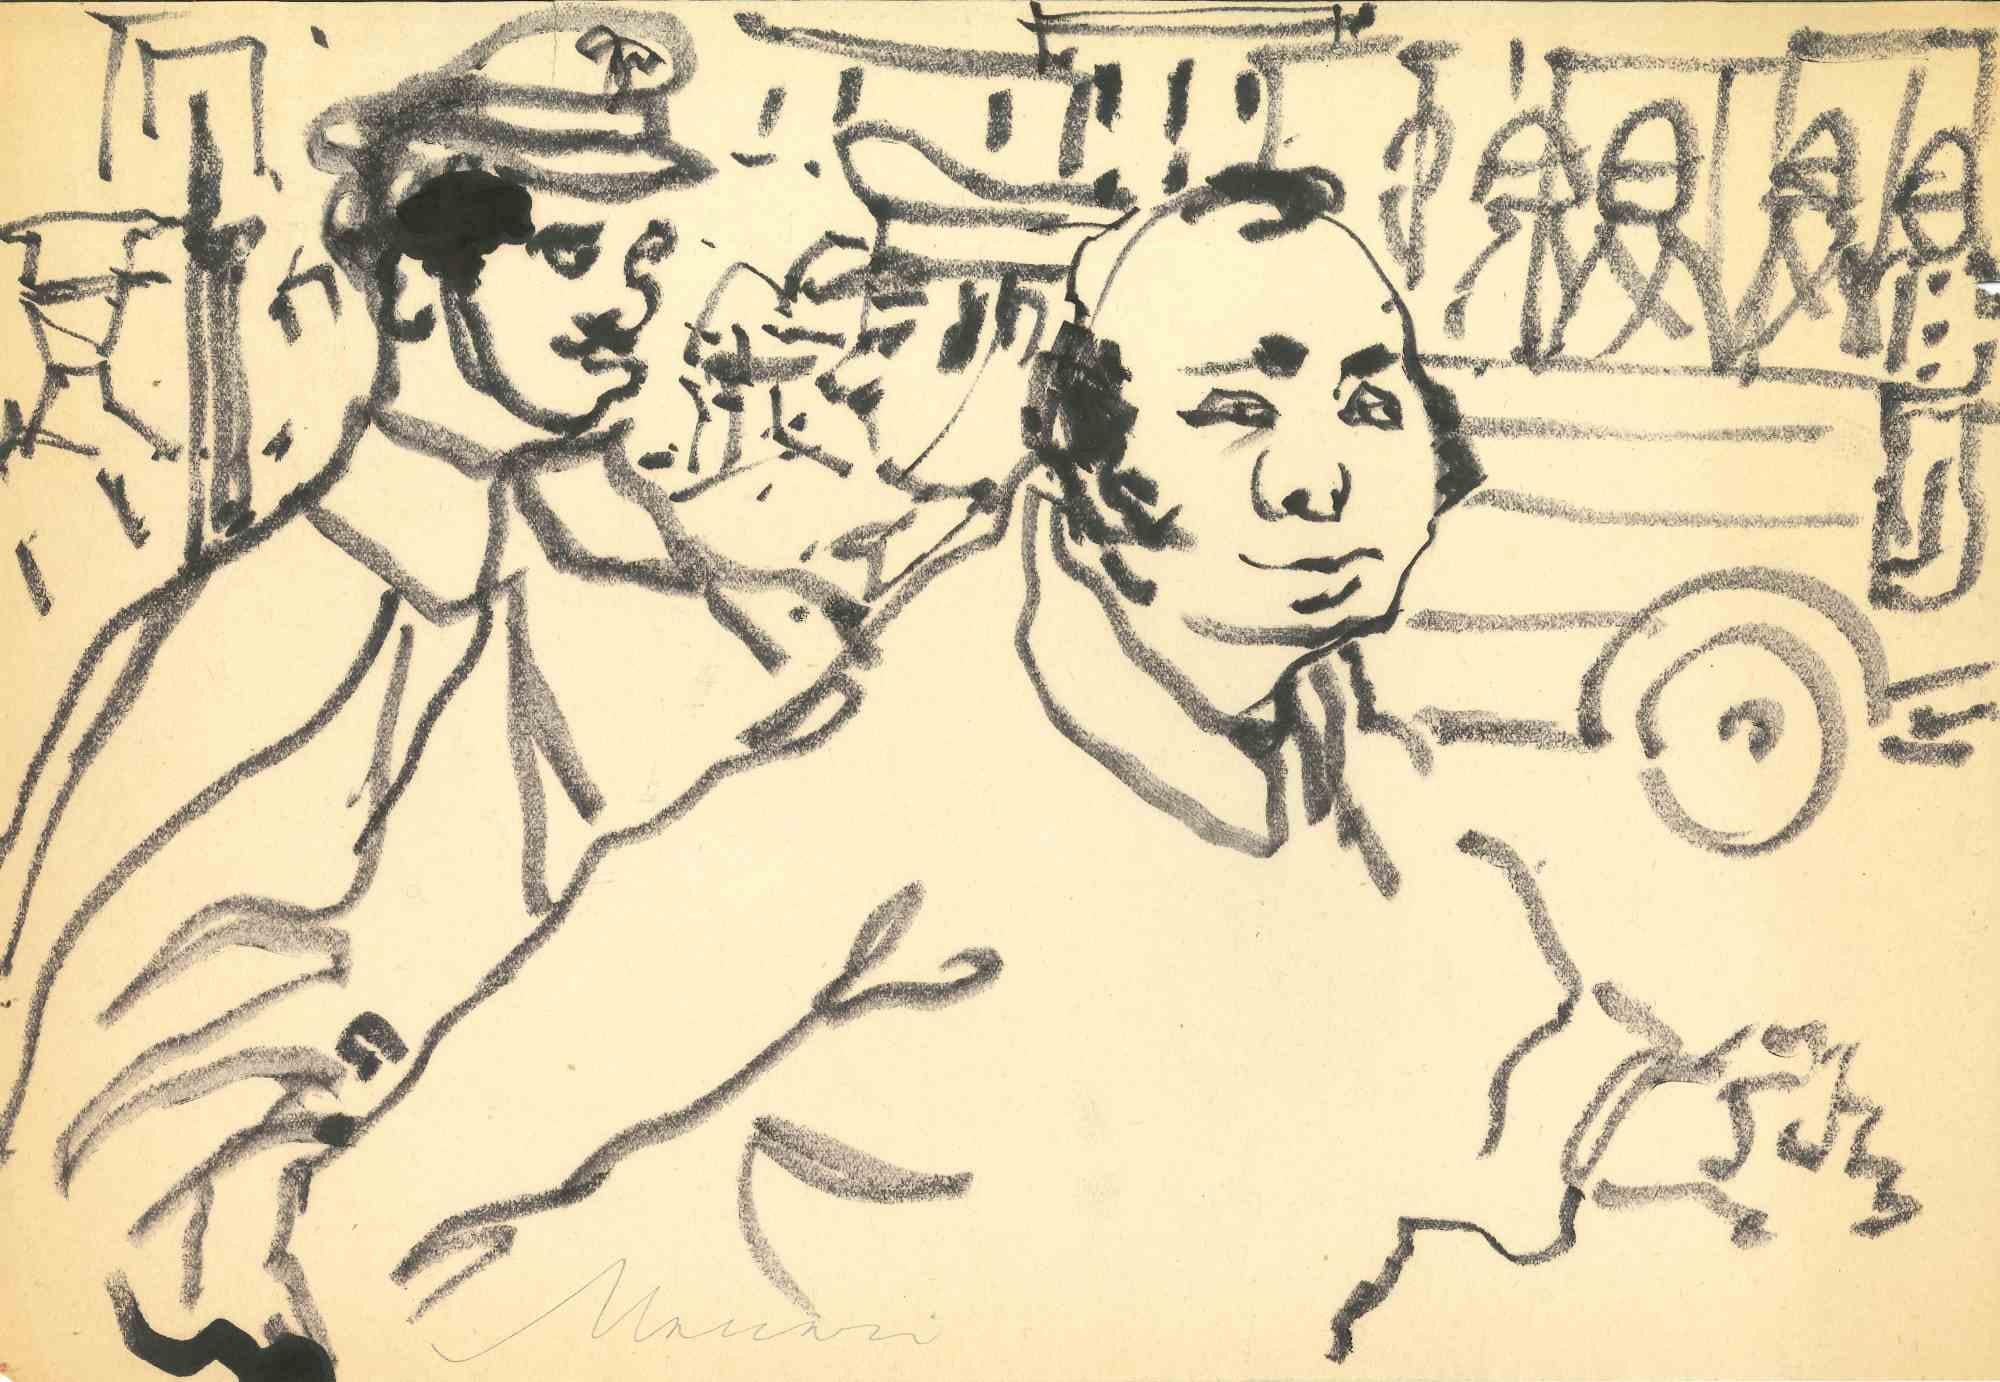 The Arrest is a Drawing in black marker on creamy-colored paper realized by Mino Maccari in 1948.

Hand-signed on the lower left.

Good conditions with minor folding on the lower margins.

The artwork is realized in deft and quick strokes through